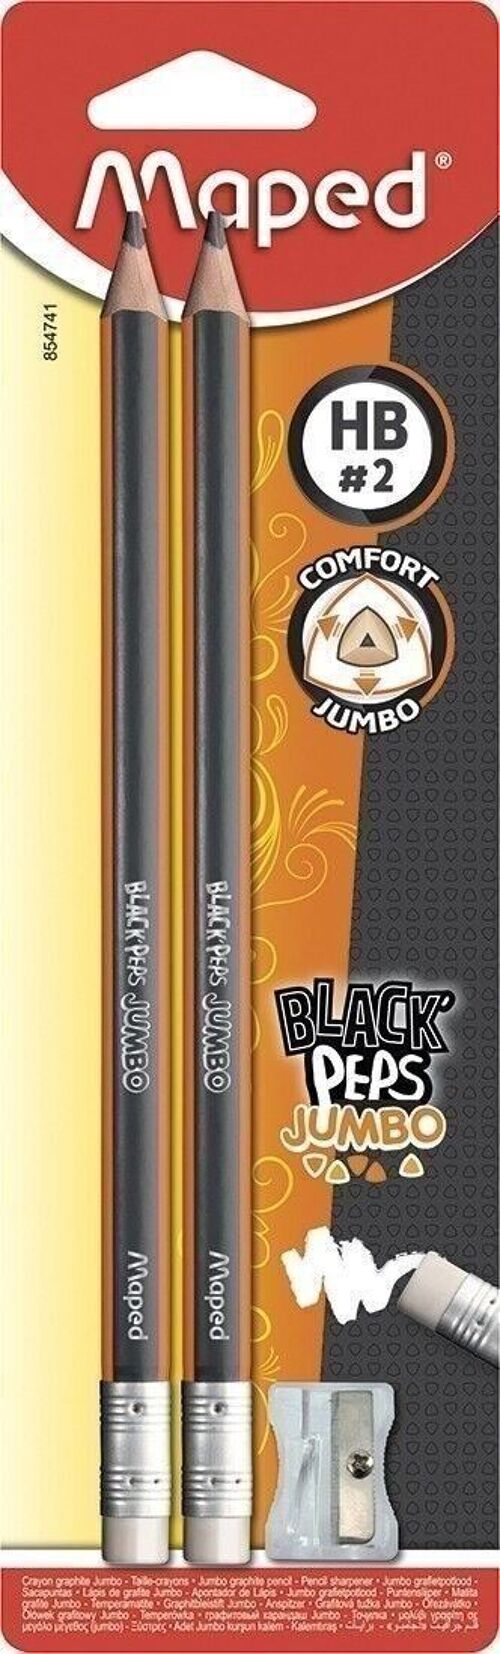 Crayon graphite BLACK'PEPS JUMBO triangulaire HB, embout gomme x 2 + 1 Taille crayon 1 usage jumbo, en blister